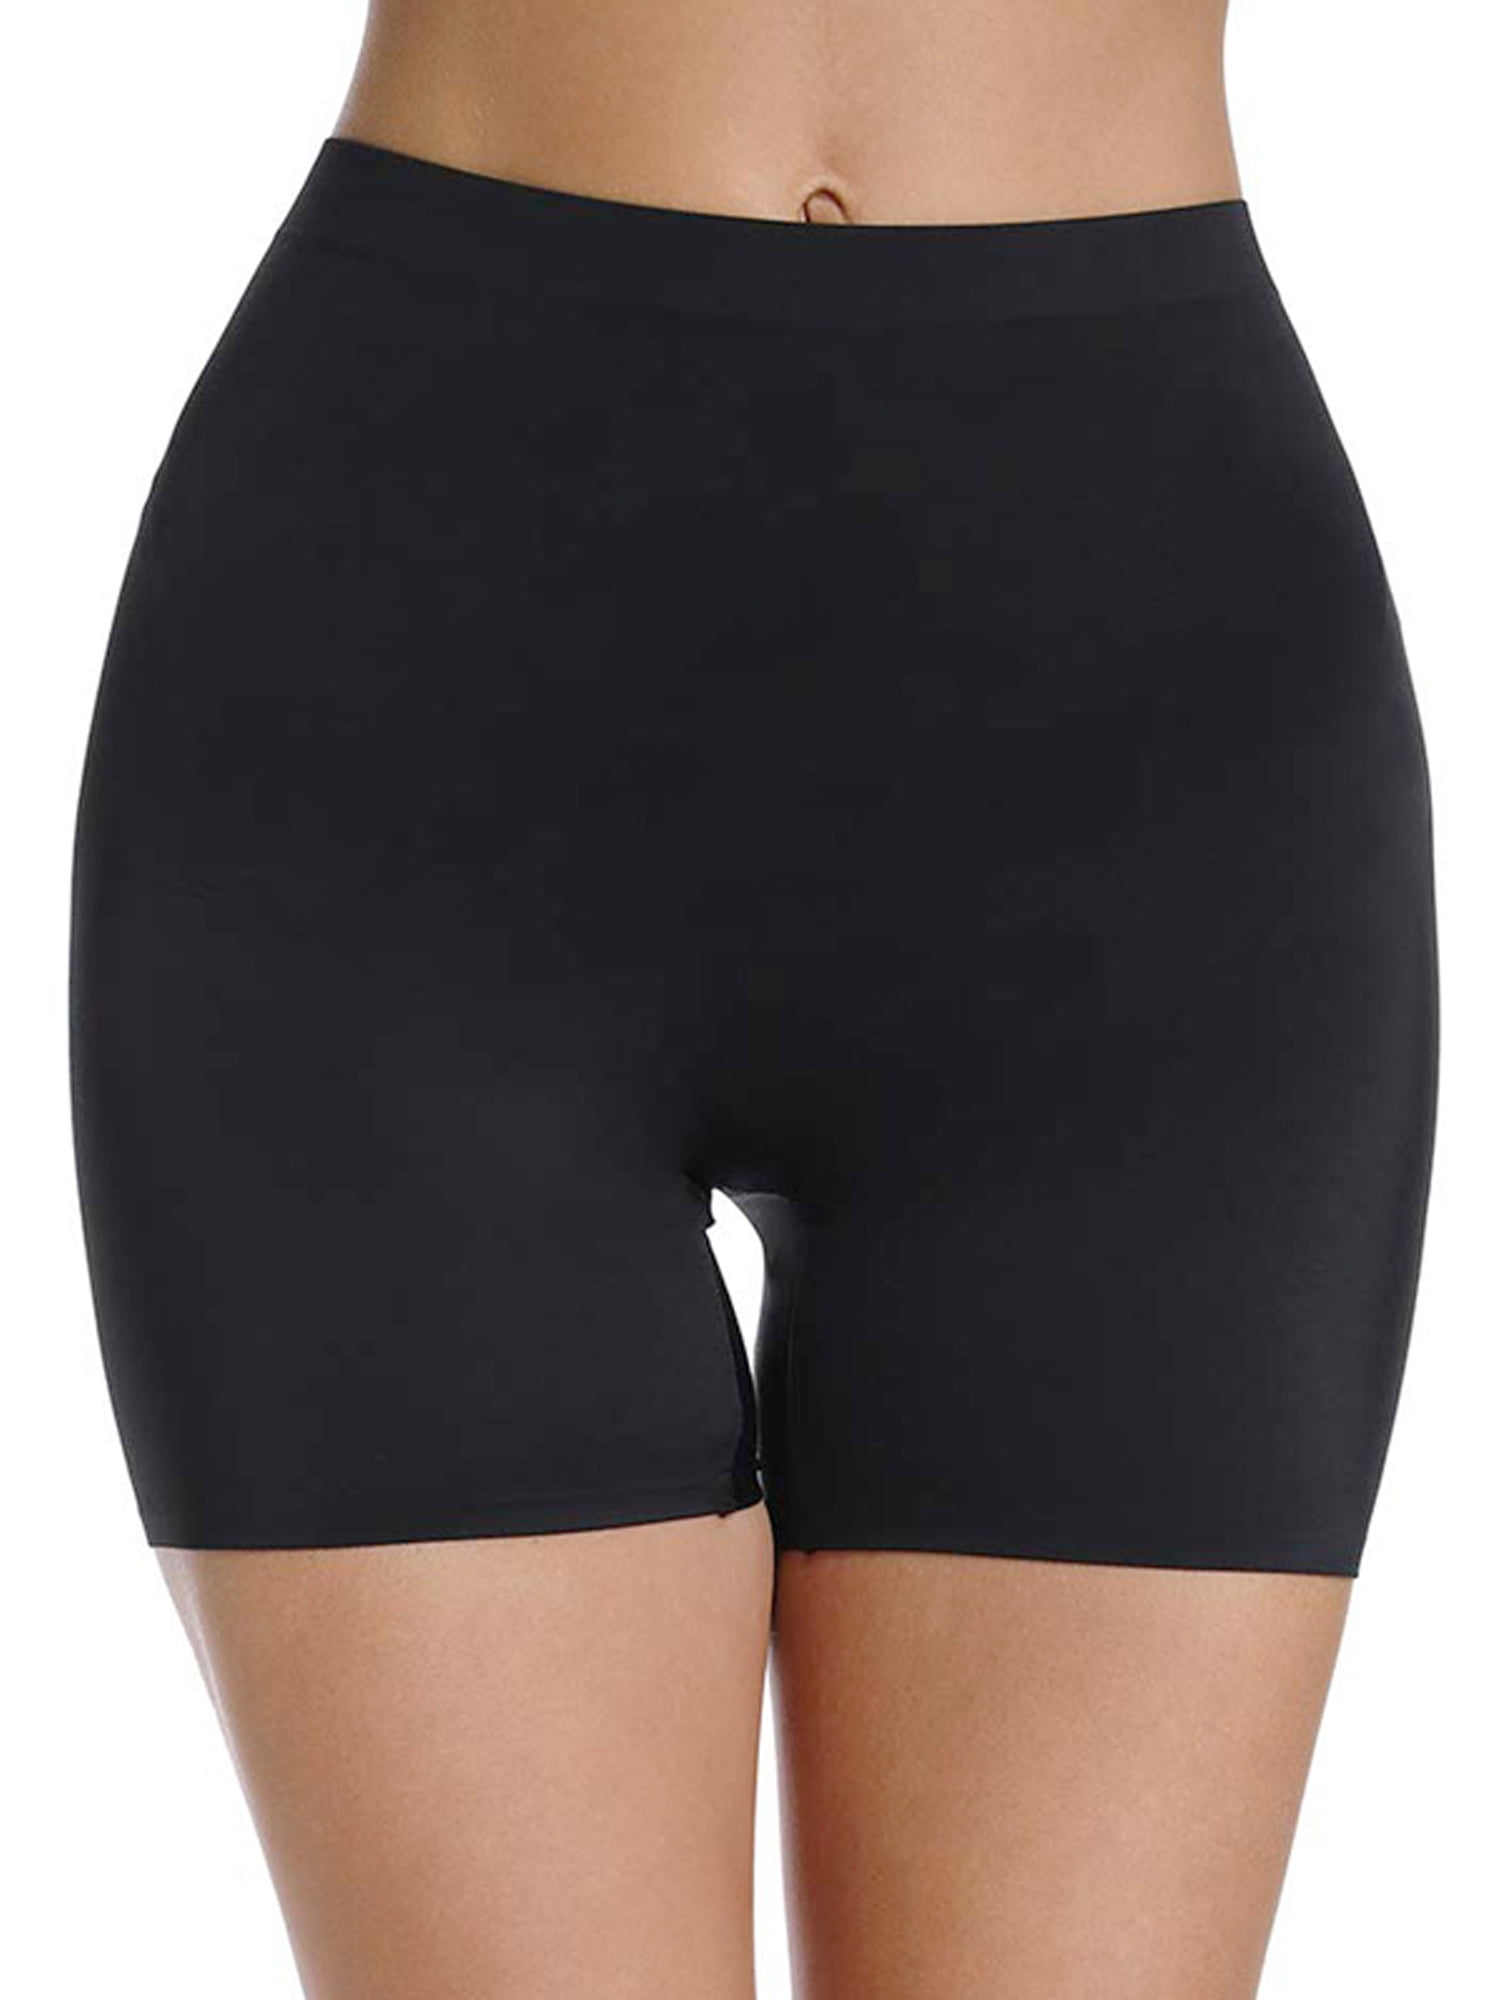 Sensual Lady Double-Layer Safety Pants with Crotch for Women Thin Sliming  Fit Summer Seamless Skirt Shorts Underwear Boxer Underpants | Size L